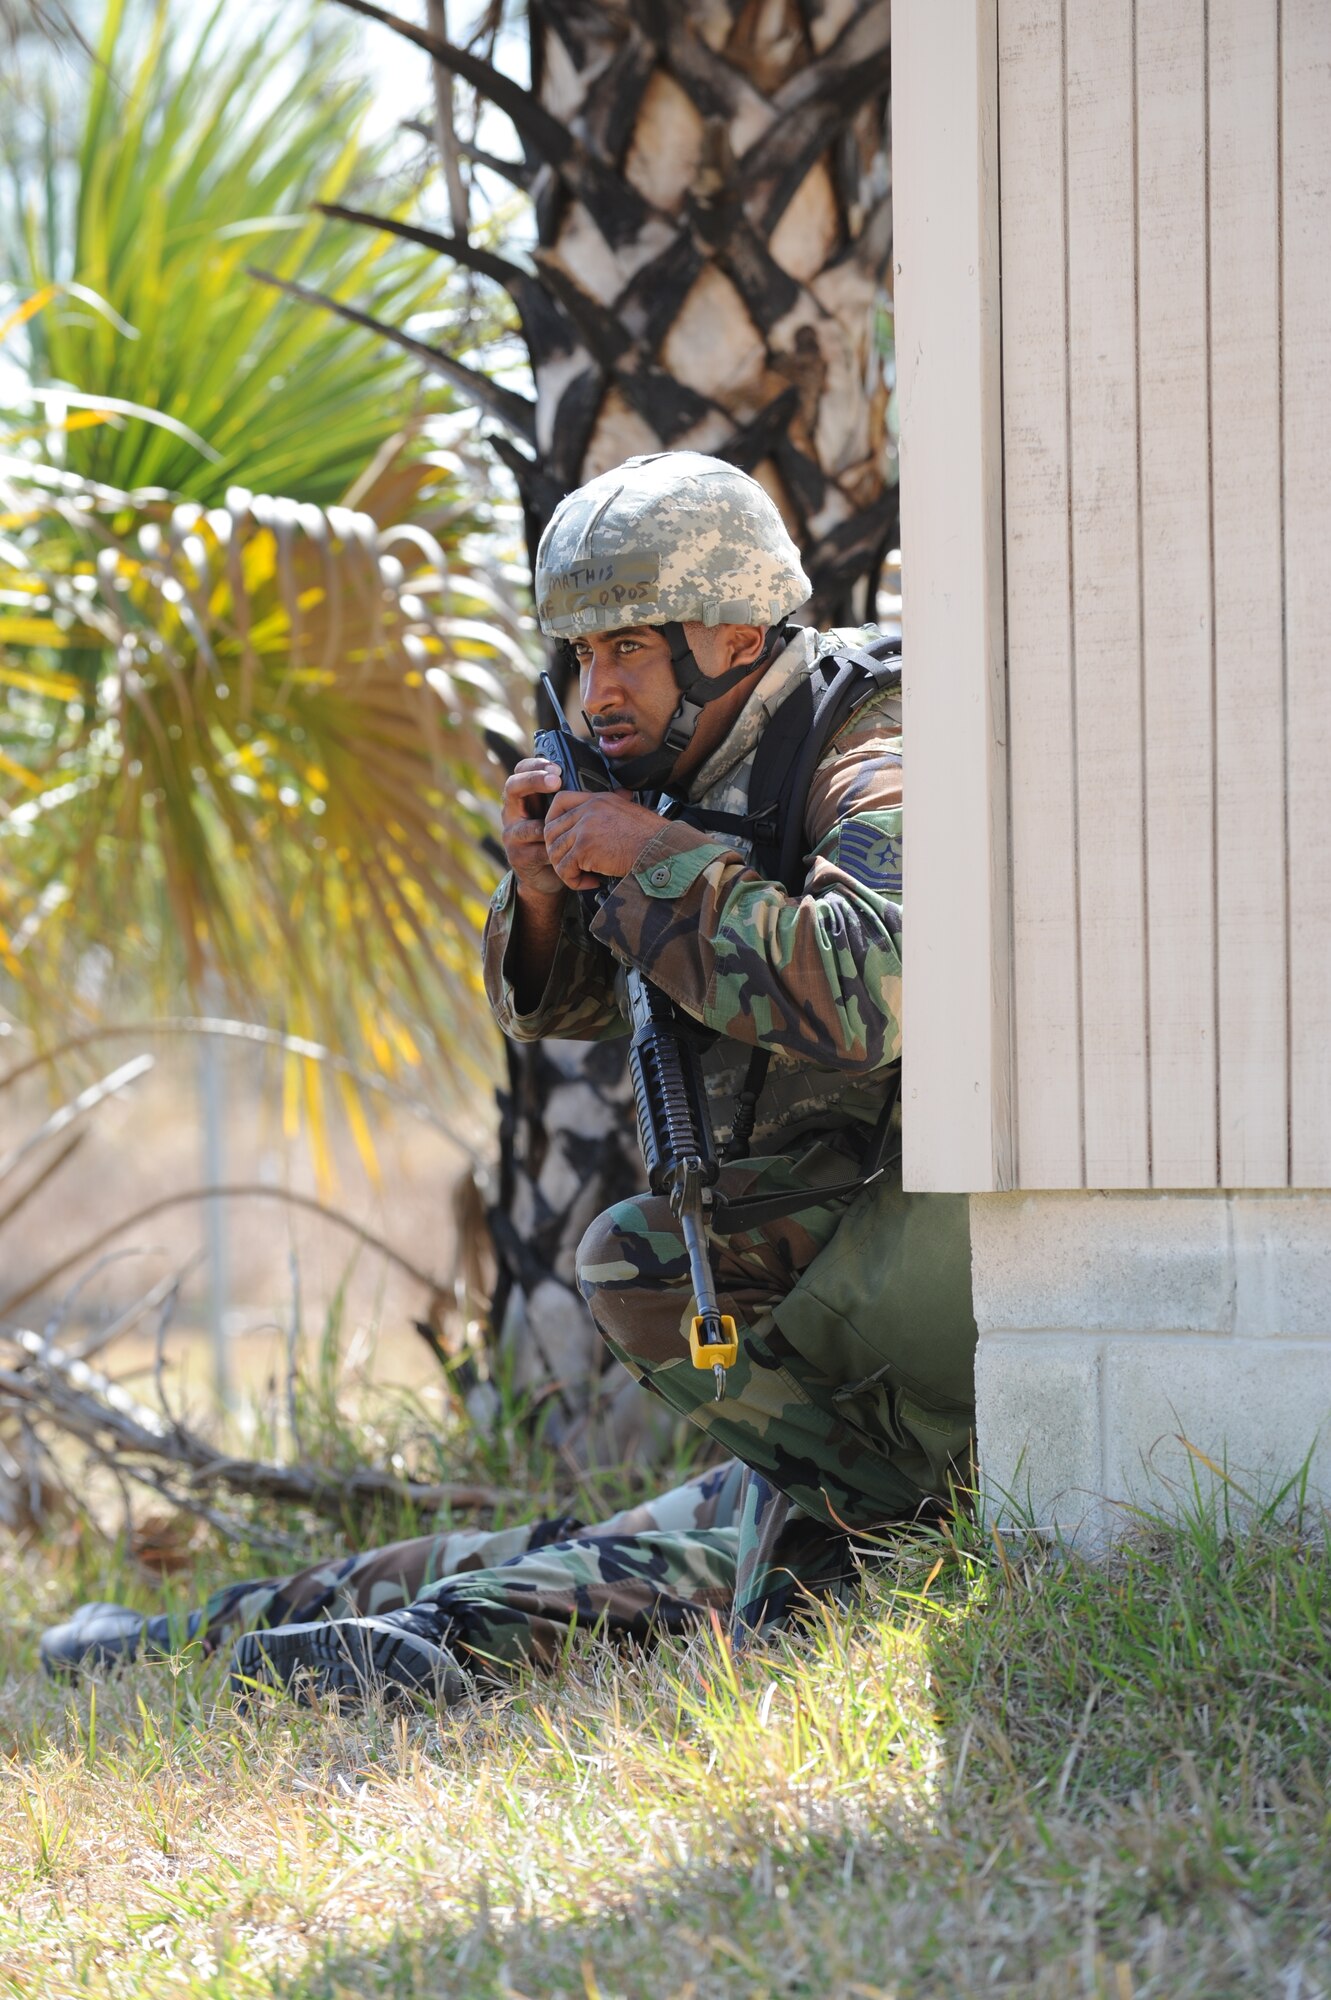 Tech. Sgt. Juan Mathis of the 45th Security Forces Squadron radios in a report of a casualty following a simulated attack at the Malabar Training Annex during the recent weeklong Operation Ocean Breeze deployment exercise. (U.S. Air Force photo/John Connell)